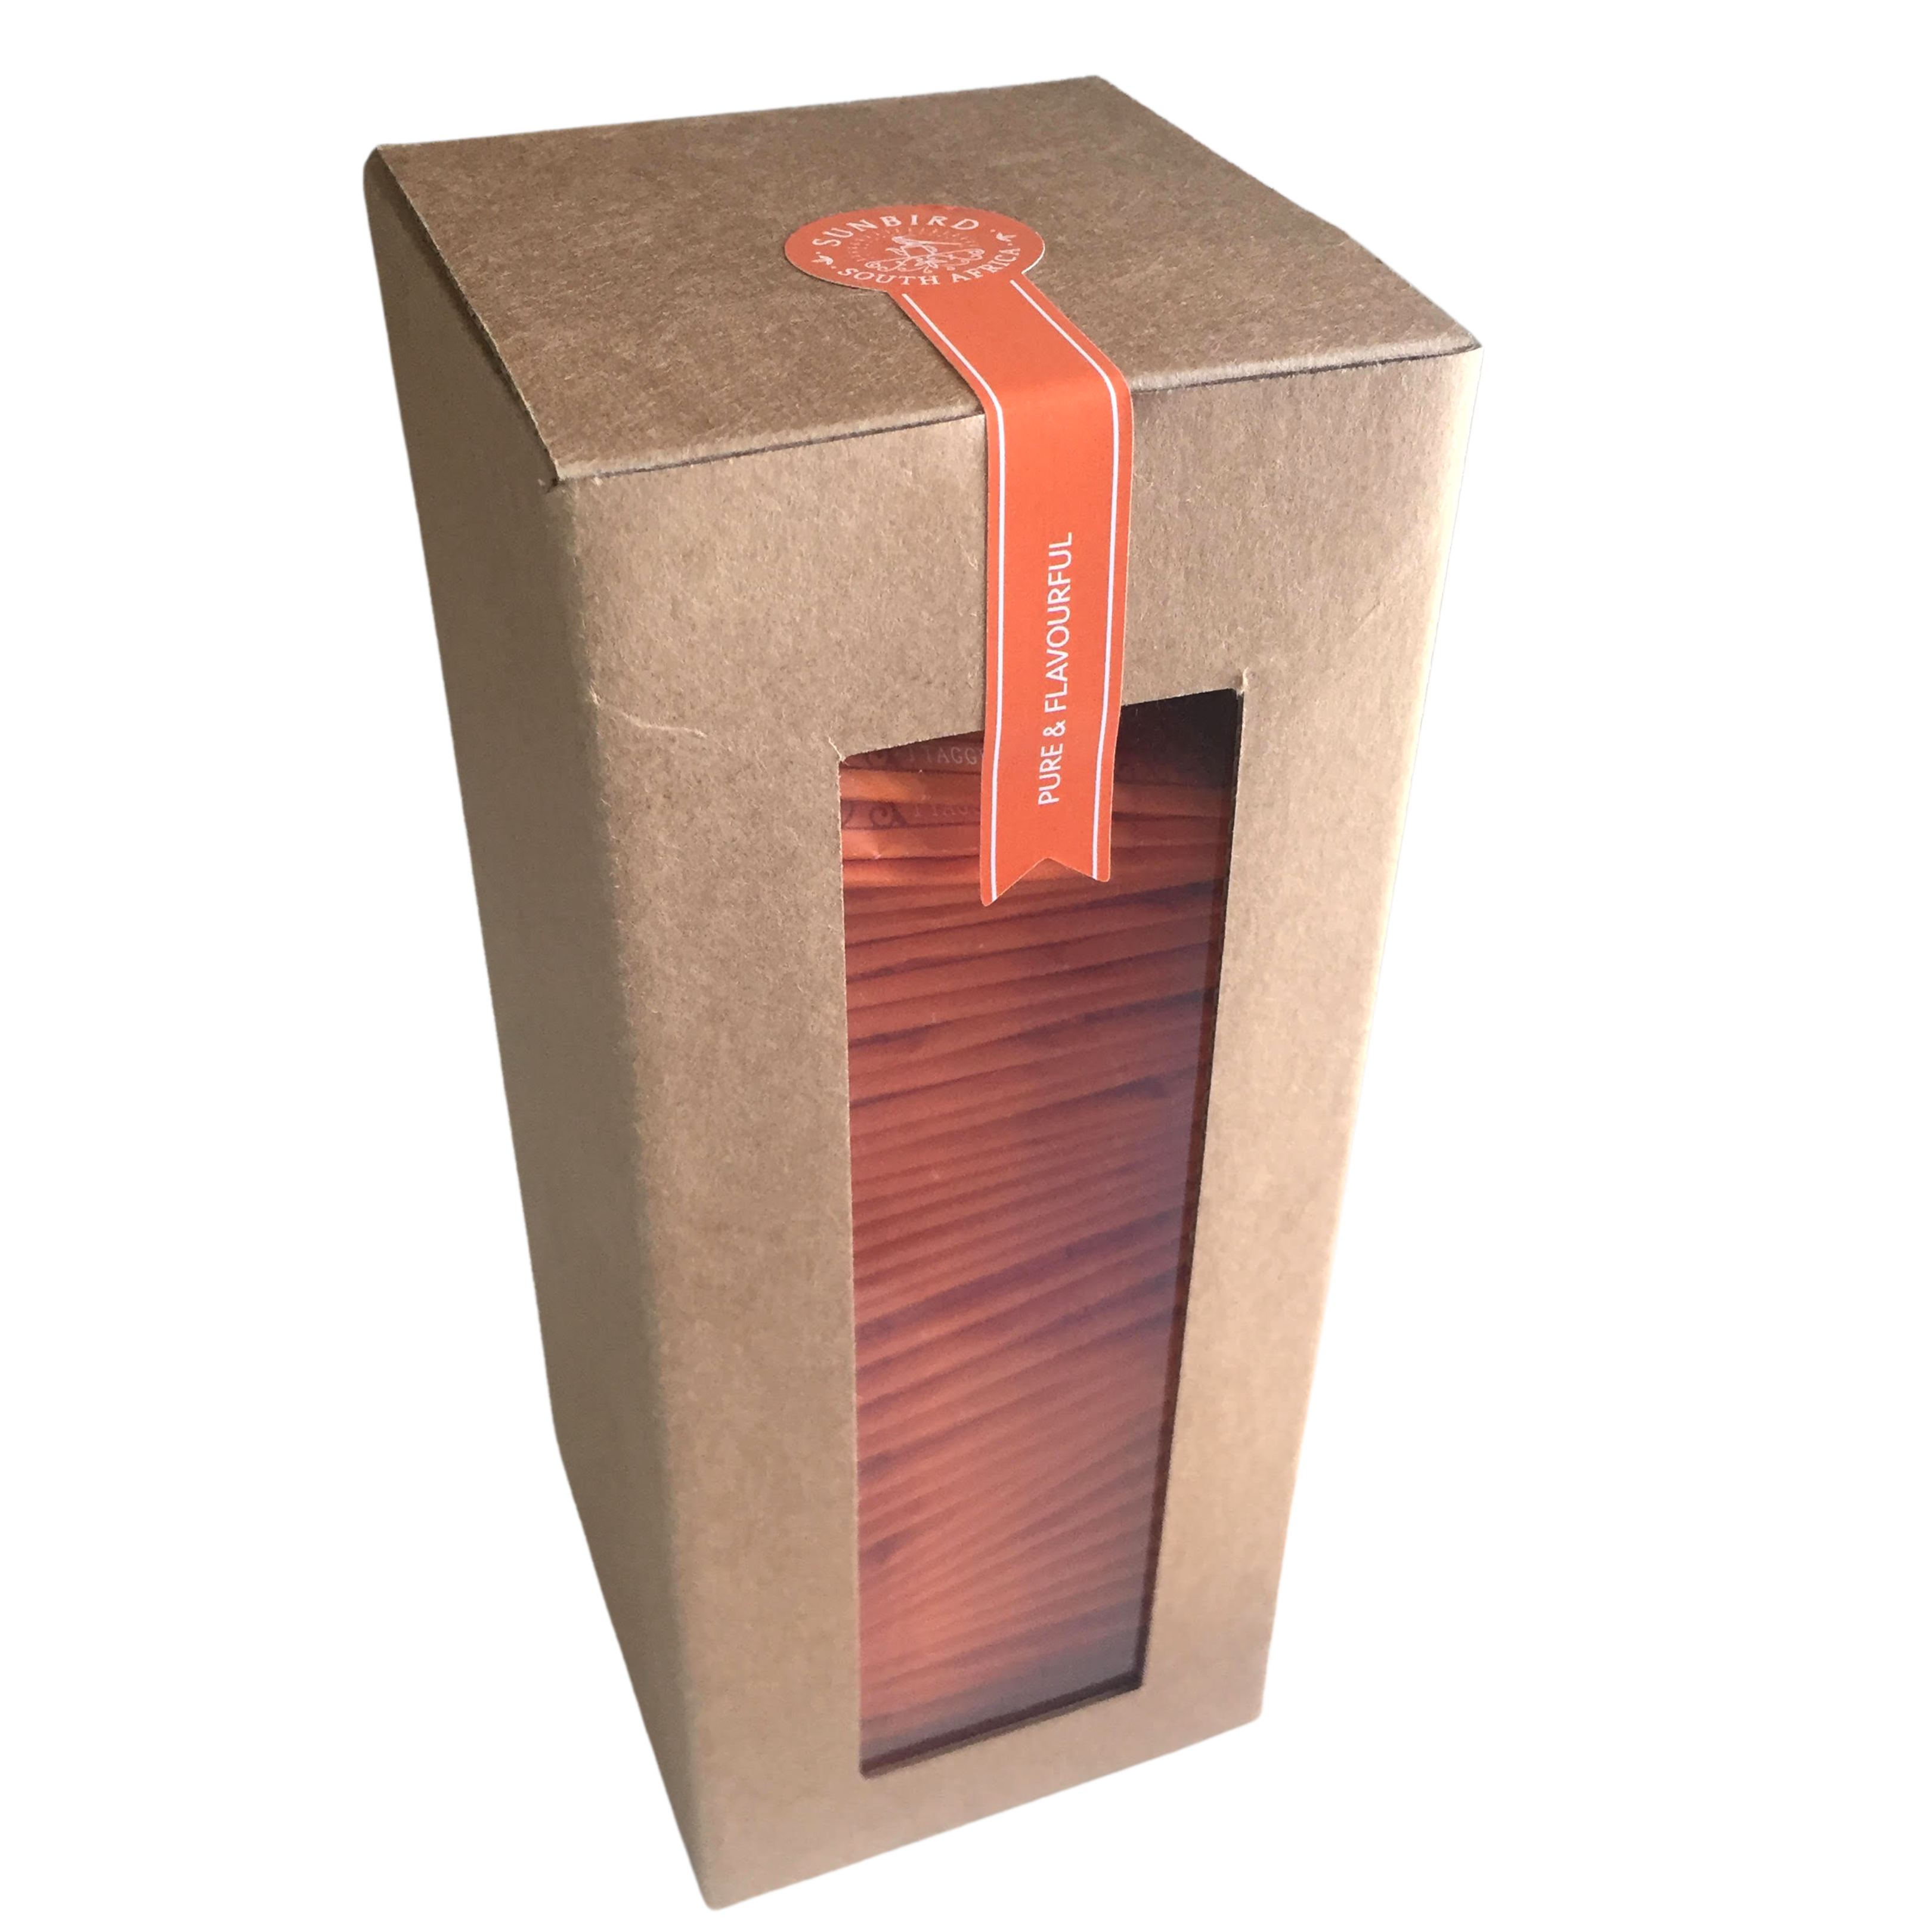 SUNBIRD ROOIBOS SINGLE SACHETS • 40 Individually Wrapped and Tagged Teabags • 100g